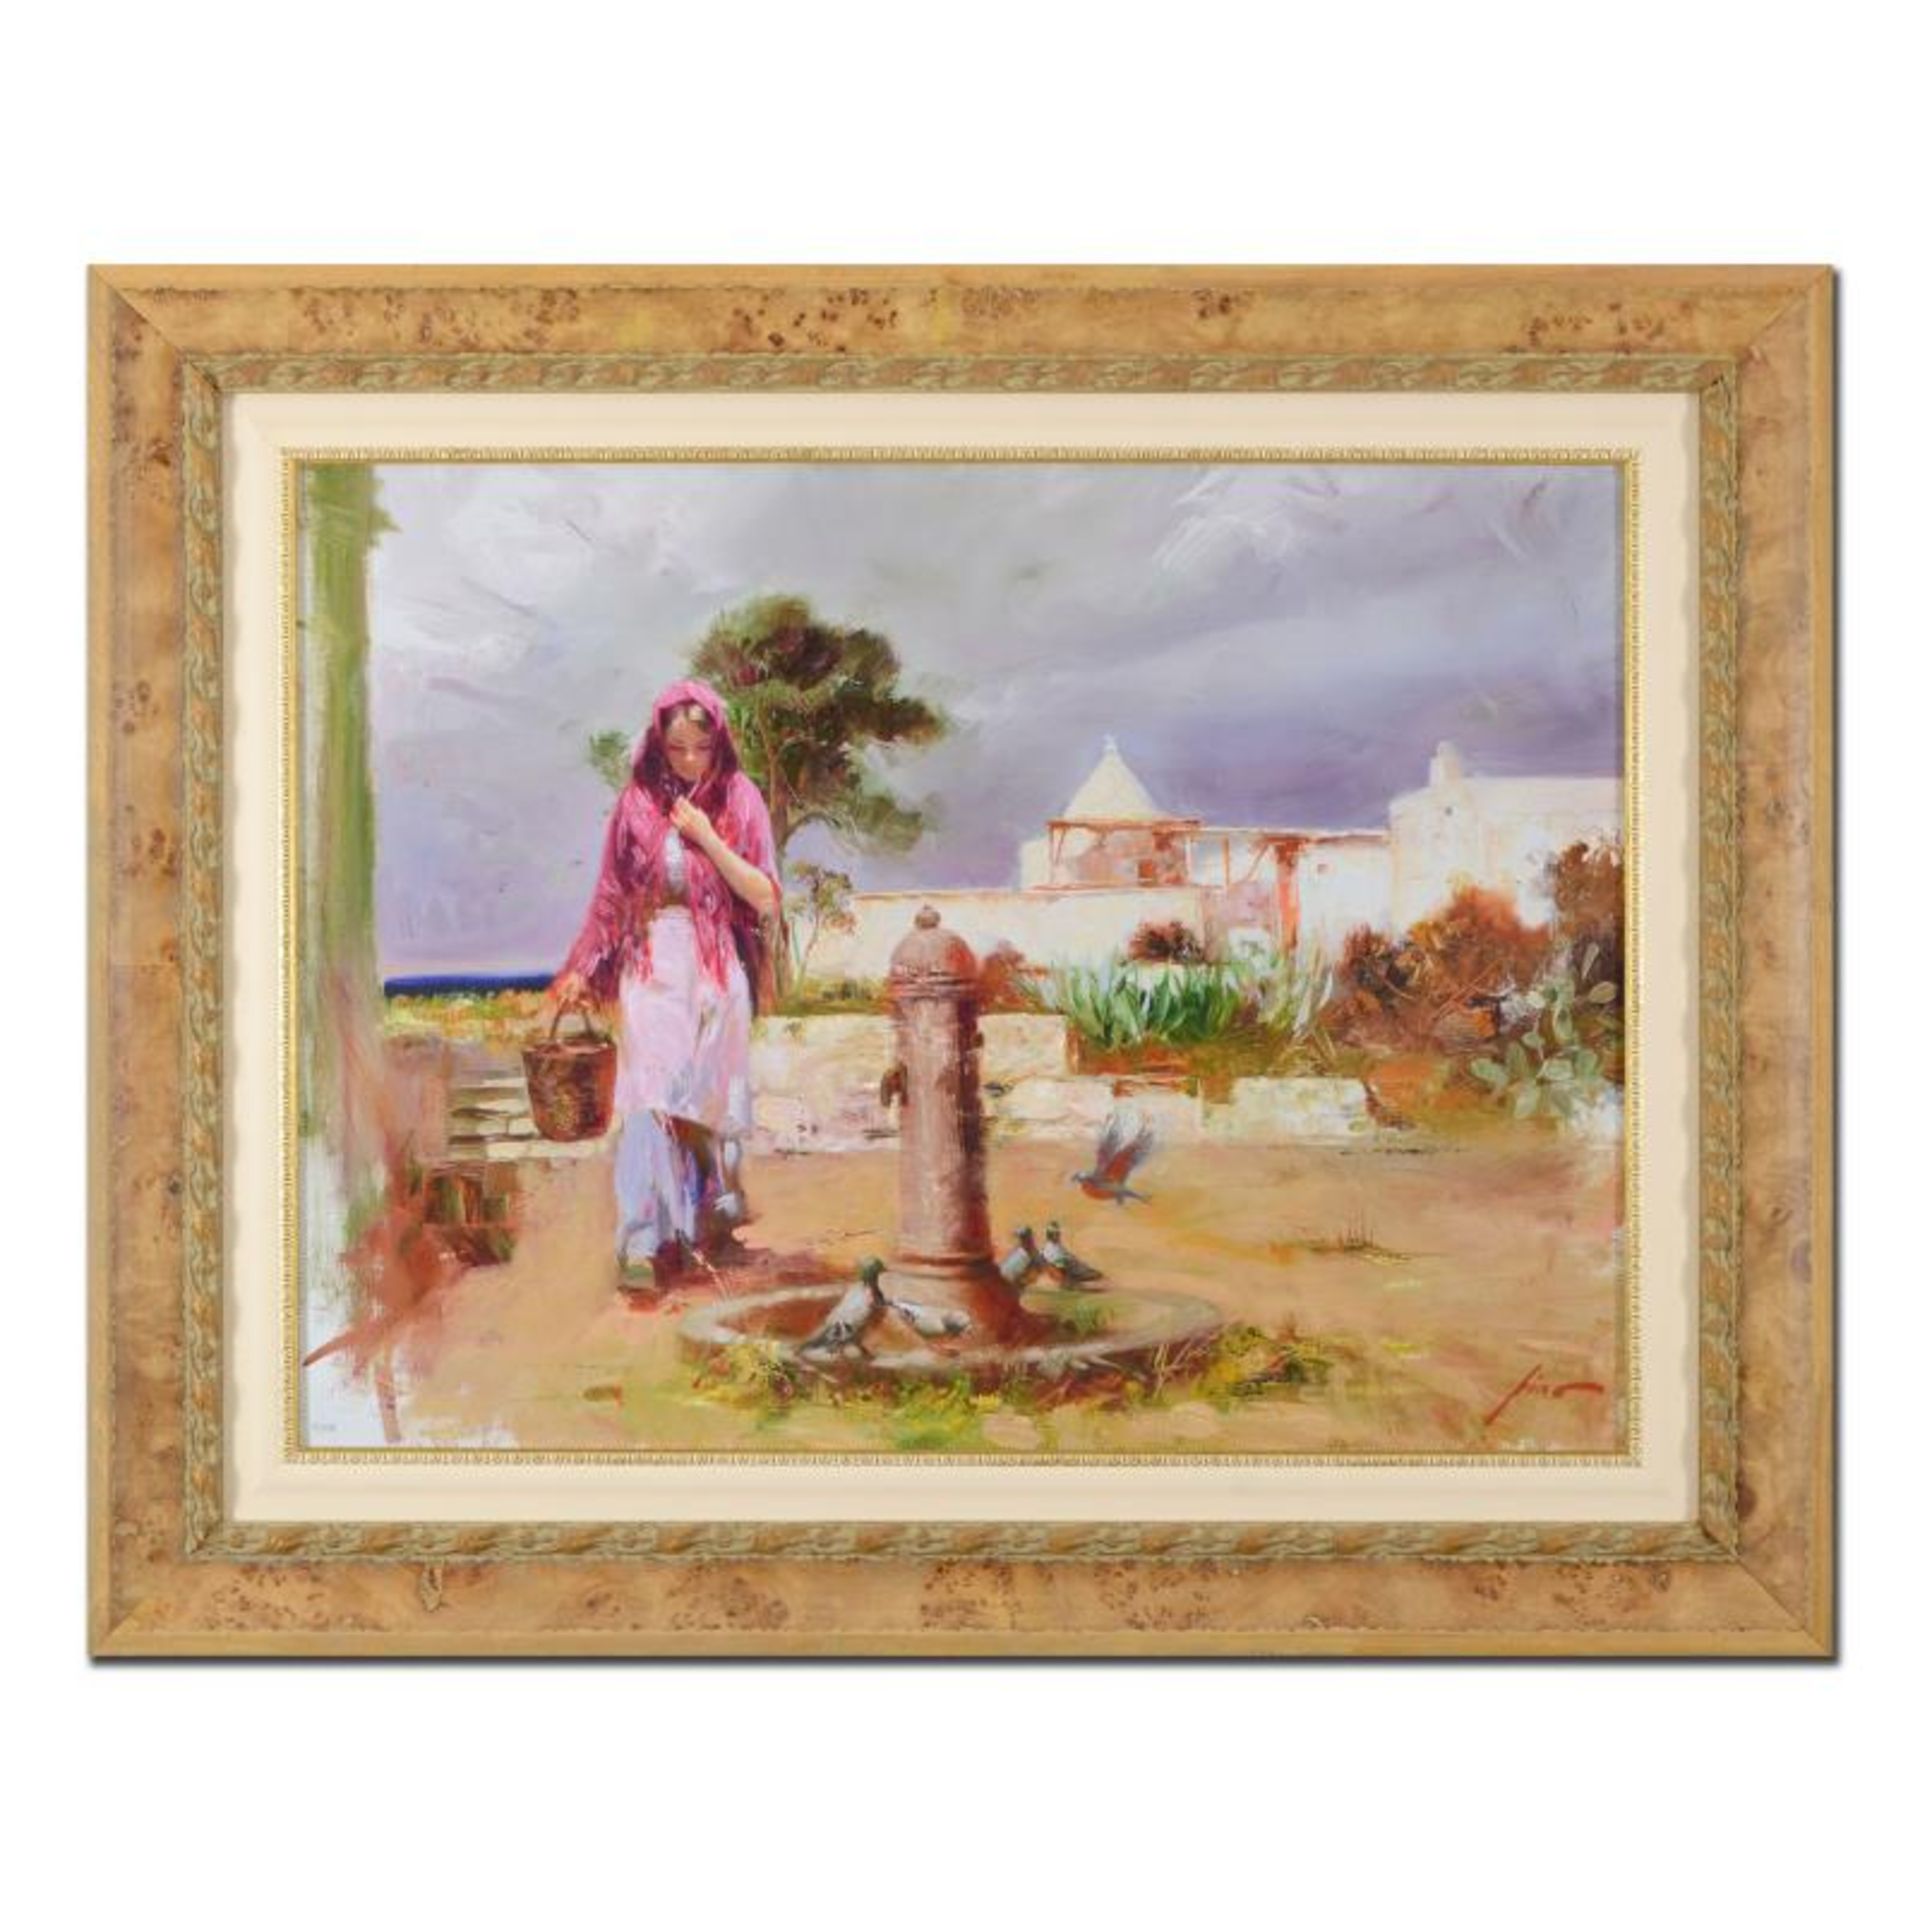 Pino (1939-2010), "The Water Fountain" Framed Limited Edition Artist-Embellished